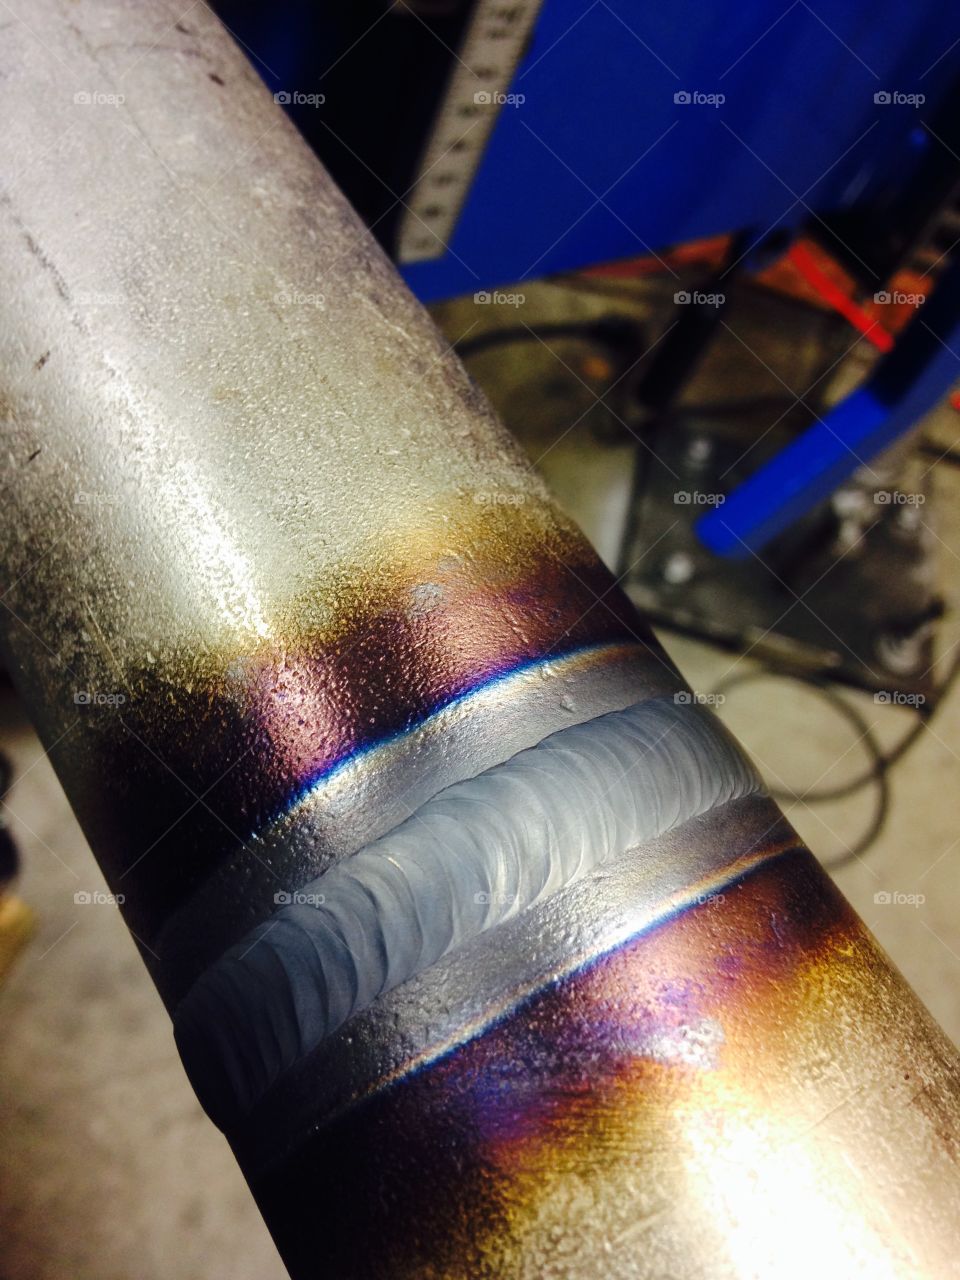 Welds in a circle translating blue color